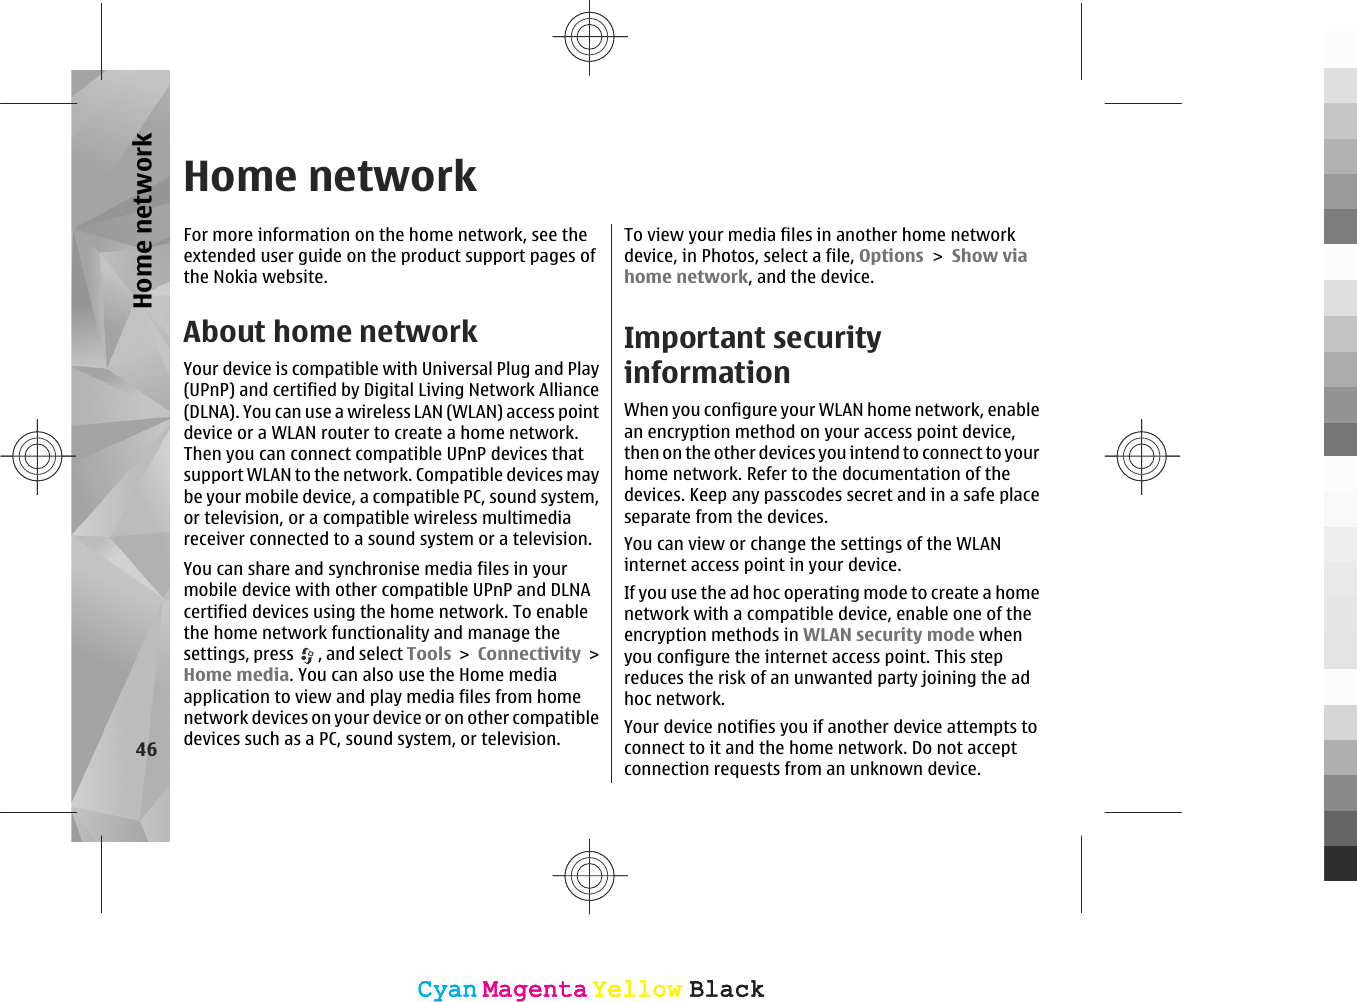 Home networkFor more information on the home network, see theextended user guide on the product support pages ofthe Nokia website.About home networkYour device is compatible with Universal Plug and Play(UPnP) and certified by Digital Living Network Alliance(DLNA). You can use a wireless LAN (WLAN) access pointdevice or a WLAN router to create a home network.Then you can connect compatible UPnP devices thatsupport WLAN to the network. Compatible devices maybe your mobile device, a compatible PC, sound system,or television, or a compatible wireless multimediareceiver connected to a sound system or a television.You can share and synchronise media files in yourmobile device with other compatible UPnP and DLNAcertified devices using the home network. To enablethe home network functionality and manage thesettings, press  , and select Tools &gt; Connectivity &gt;Home media. You can also use the Home mediaapplication to view and play media files from homenetwork devices on your device or on other compatibledevices such as a PC, sound system, or television.To view your media files in another home networkdevice, in Photos, select a file, Options &gt; Show viahome network, and the device.Important securityinformationWhen you configure your WLAN home network, enablean encryption method on your access point device,then on the other devices you intend to connect to yourhome network. Refer to the documentation of thedevices. Keep any passcodes secret and in a safe placeseparate from the devices.You can view or change the settings of the WLANinternet access point in your device.If you use the ad hoc operating mode to create a homenetwork with a compatible device, enable one of theencryption methods in WLAN security mode whenyou configure the internet access point. This stepreduces the risk of an unwanted party joining the adhoc network.Your device notifies you if another device attempts toconnect to it and the home network. Do not acceptconnection requests from an unknown device.46Home networkCyanCyanMagentaMagentaYellowYellowBlackBlackCyanCyanMagentaMagentaYellowYellowBlackBlack